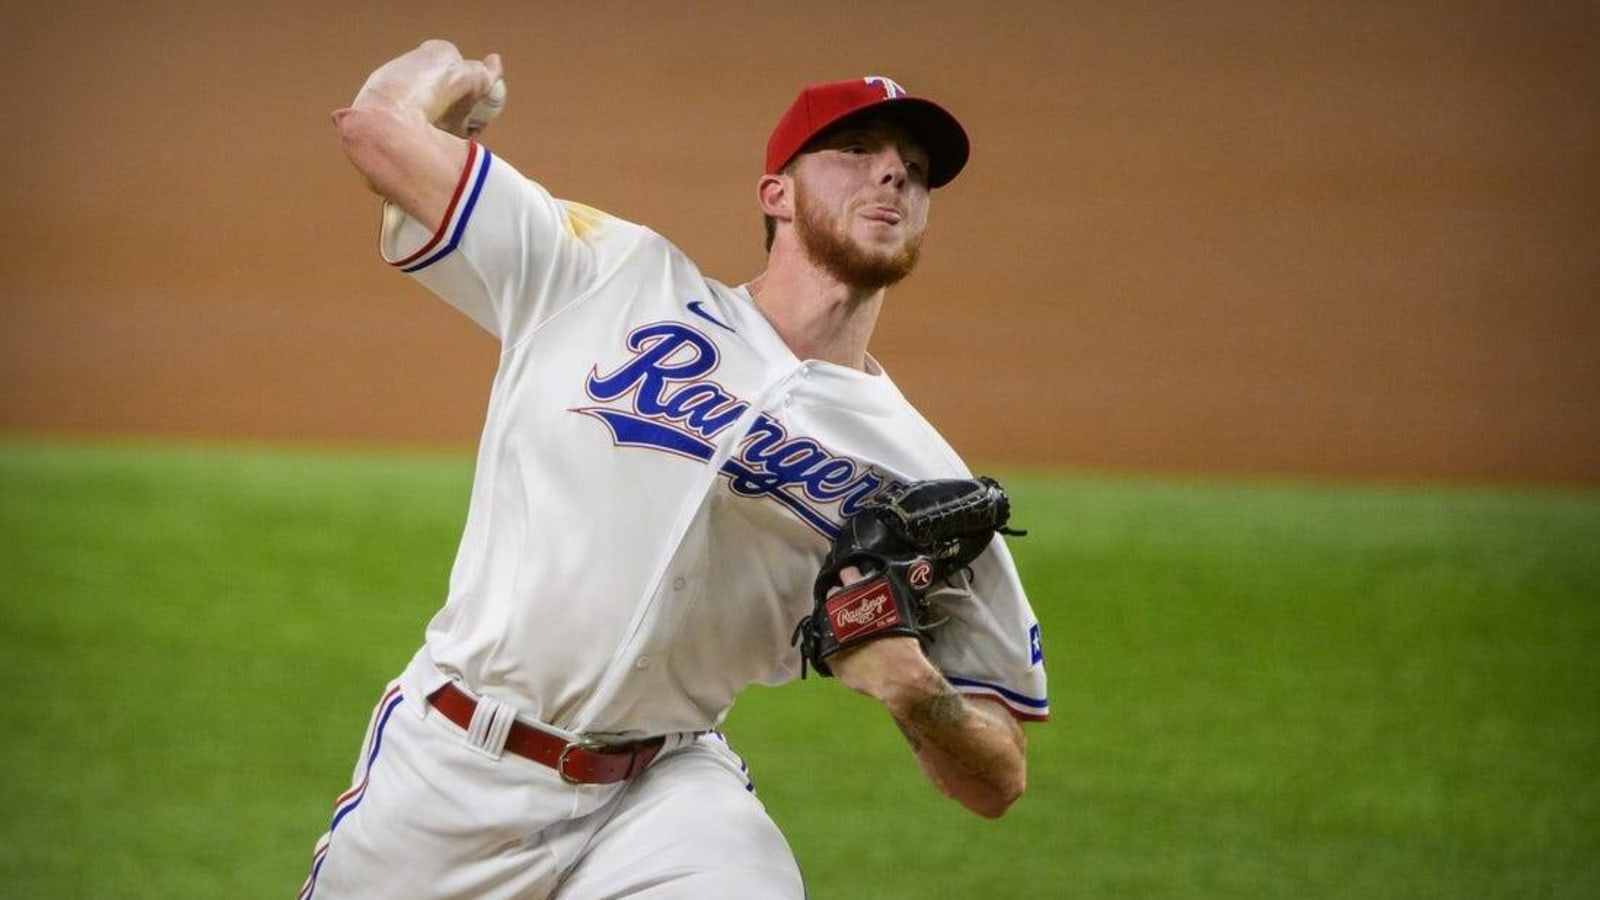 Rangers add two pitchers ahead of final series